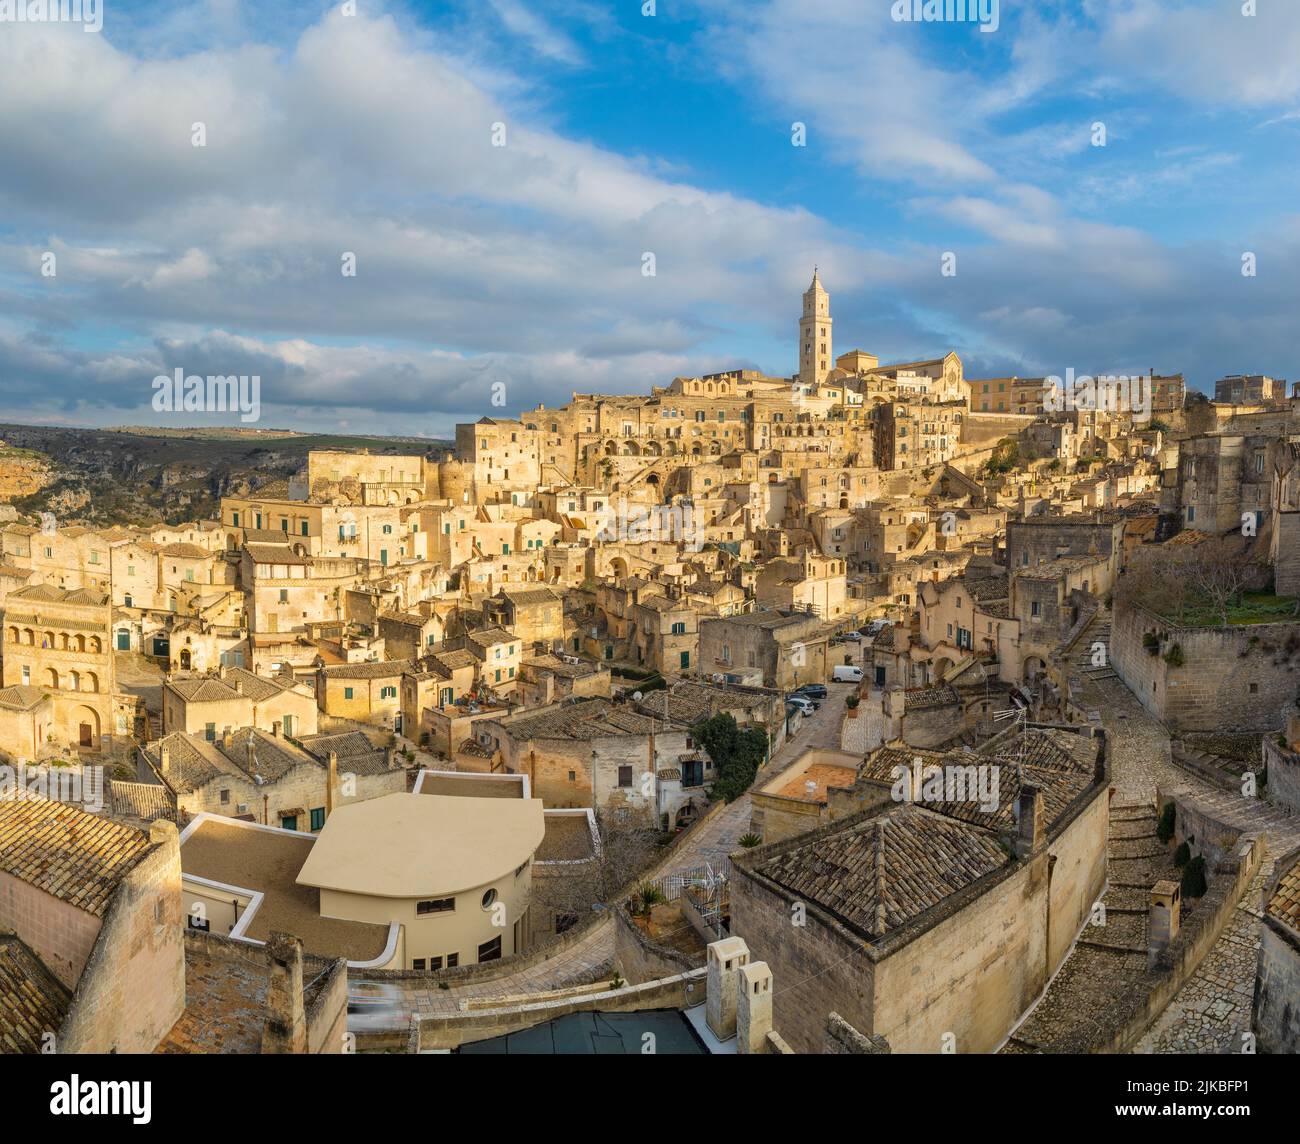 Matera - The cityscape in the sunset light. Stock Photo